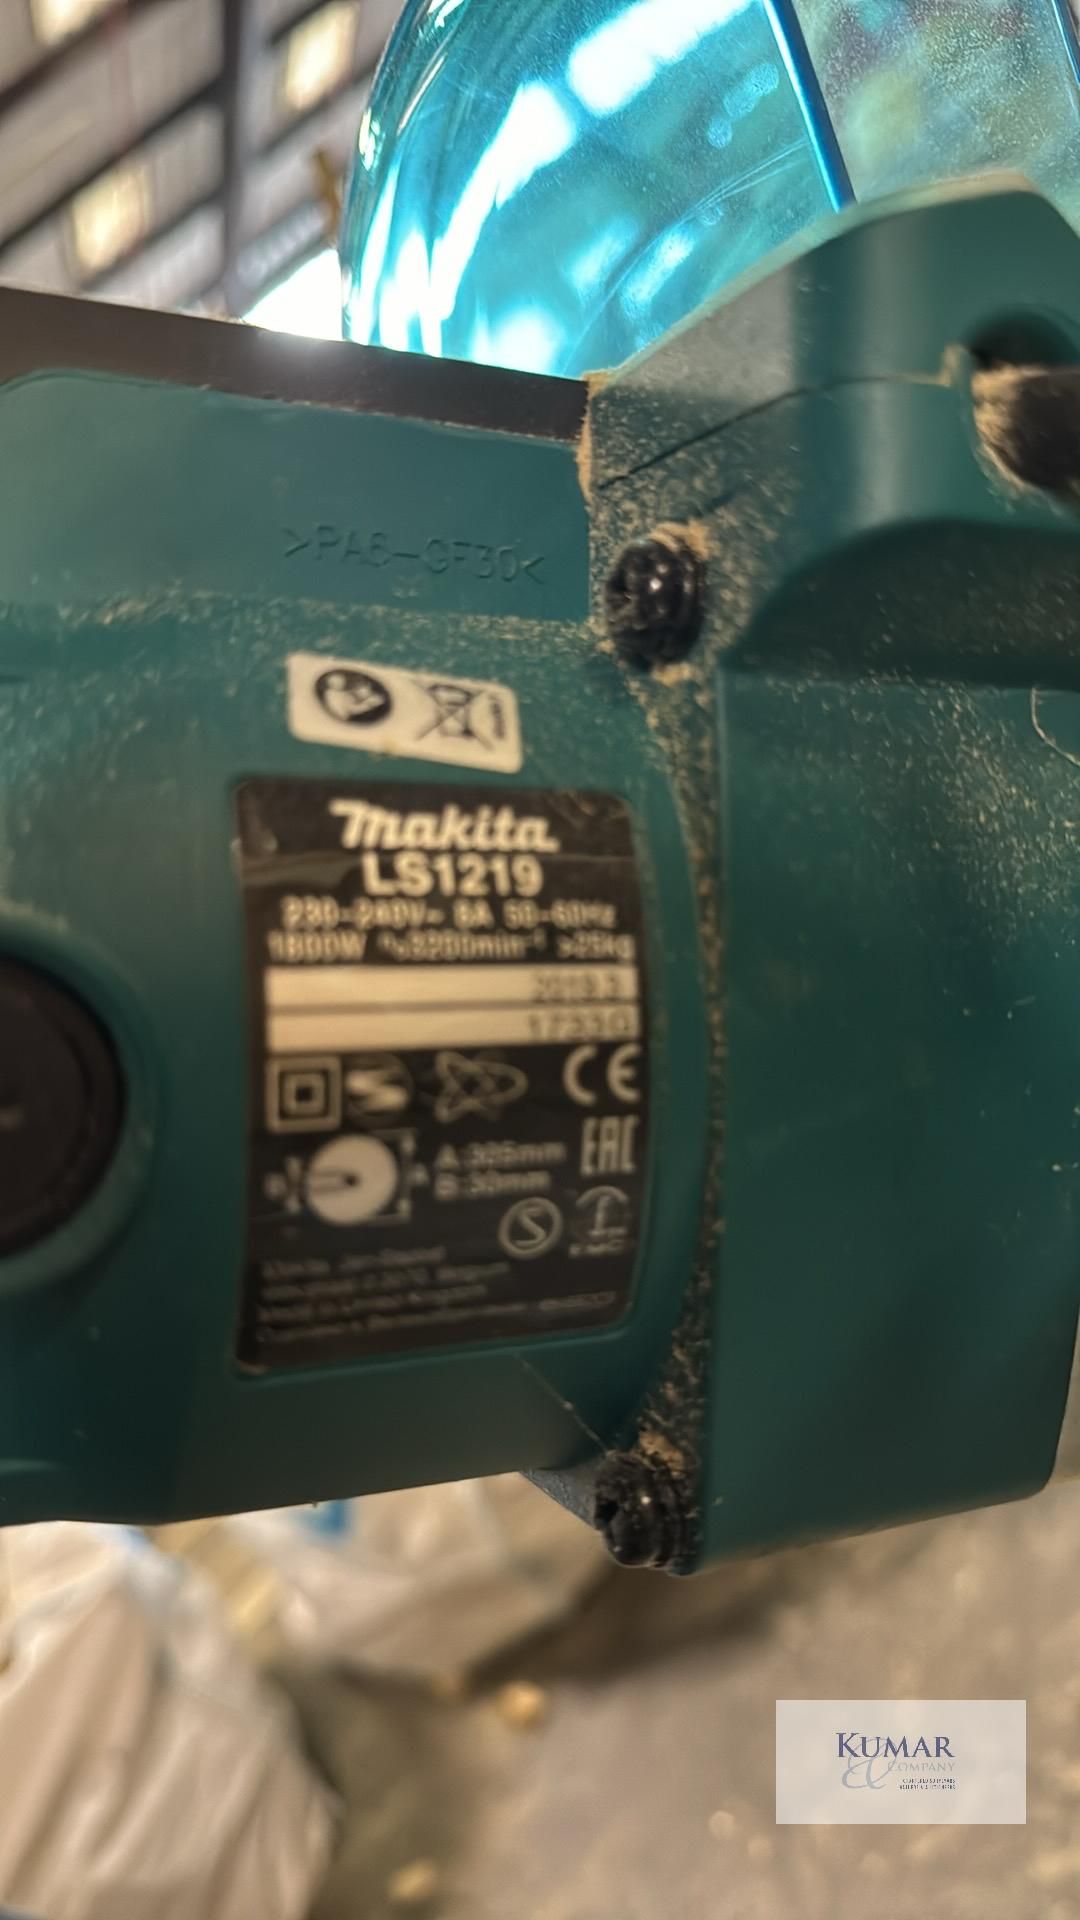 Makita LS1219 305mm Slide Compound Mitre Saw, Serial No.1733G, (03/2019) - Image 8 of 12